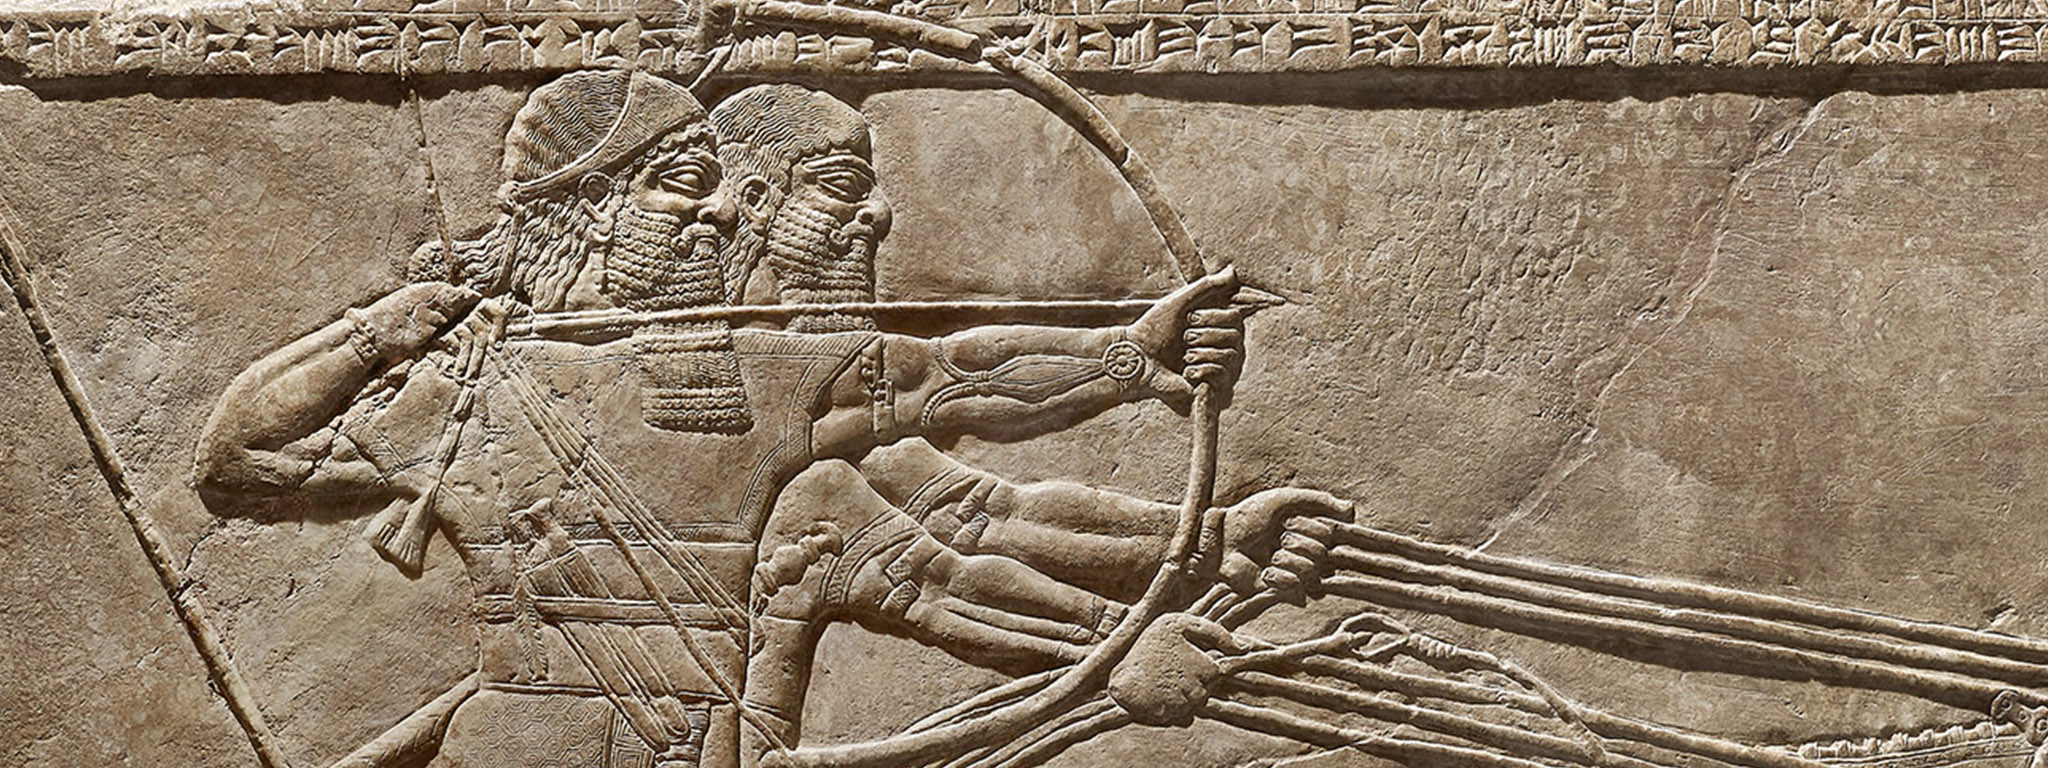 Royal Lion Hunt (detail), Assyrian, 875–860 BC, Kalhu (Nimrud), Northwest Palace, reign of Ashurnasirpal II, gypsum. British Museum, London, 1849,1222.8, 1849. Image © The Trustees of the British Museum. All rights reserved 